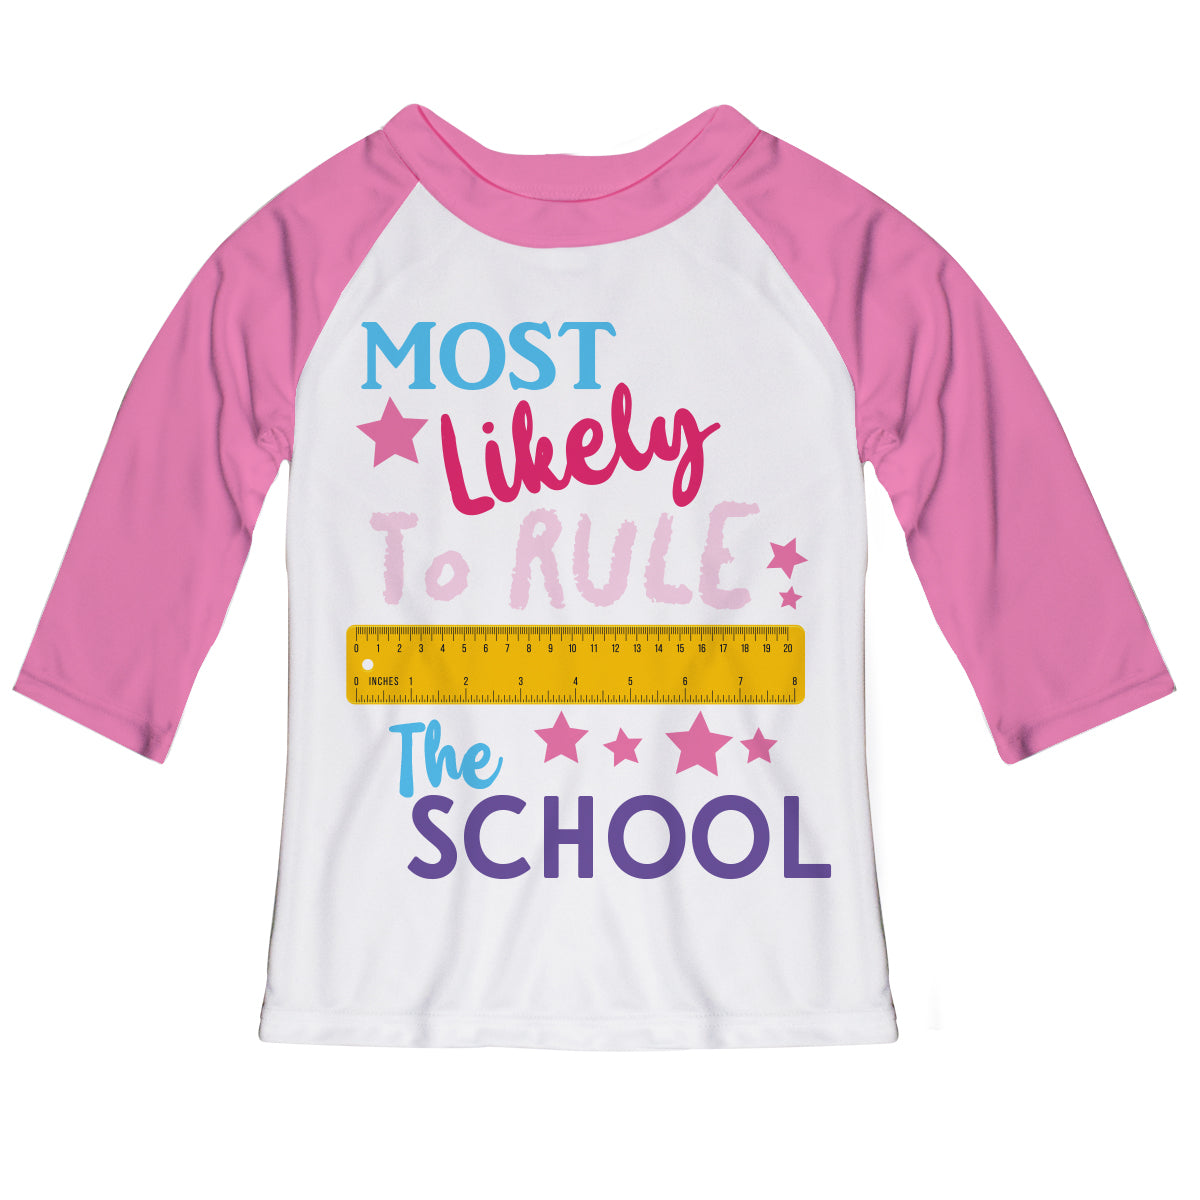 Most Likely To Rule White and Pink Raglan Tee Shirt 3/4 Sleeve